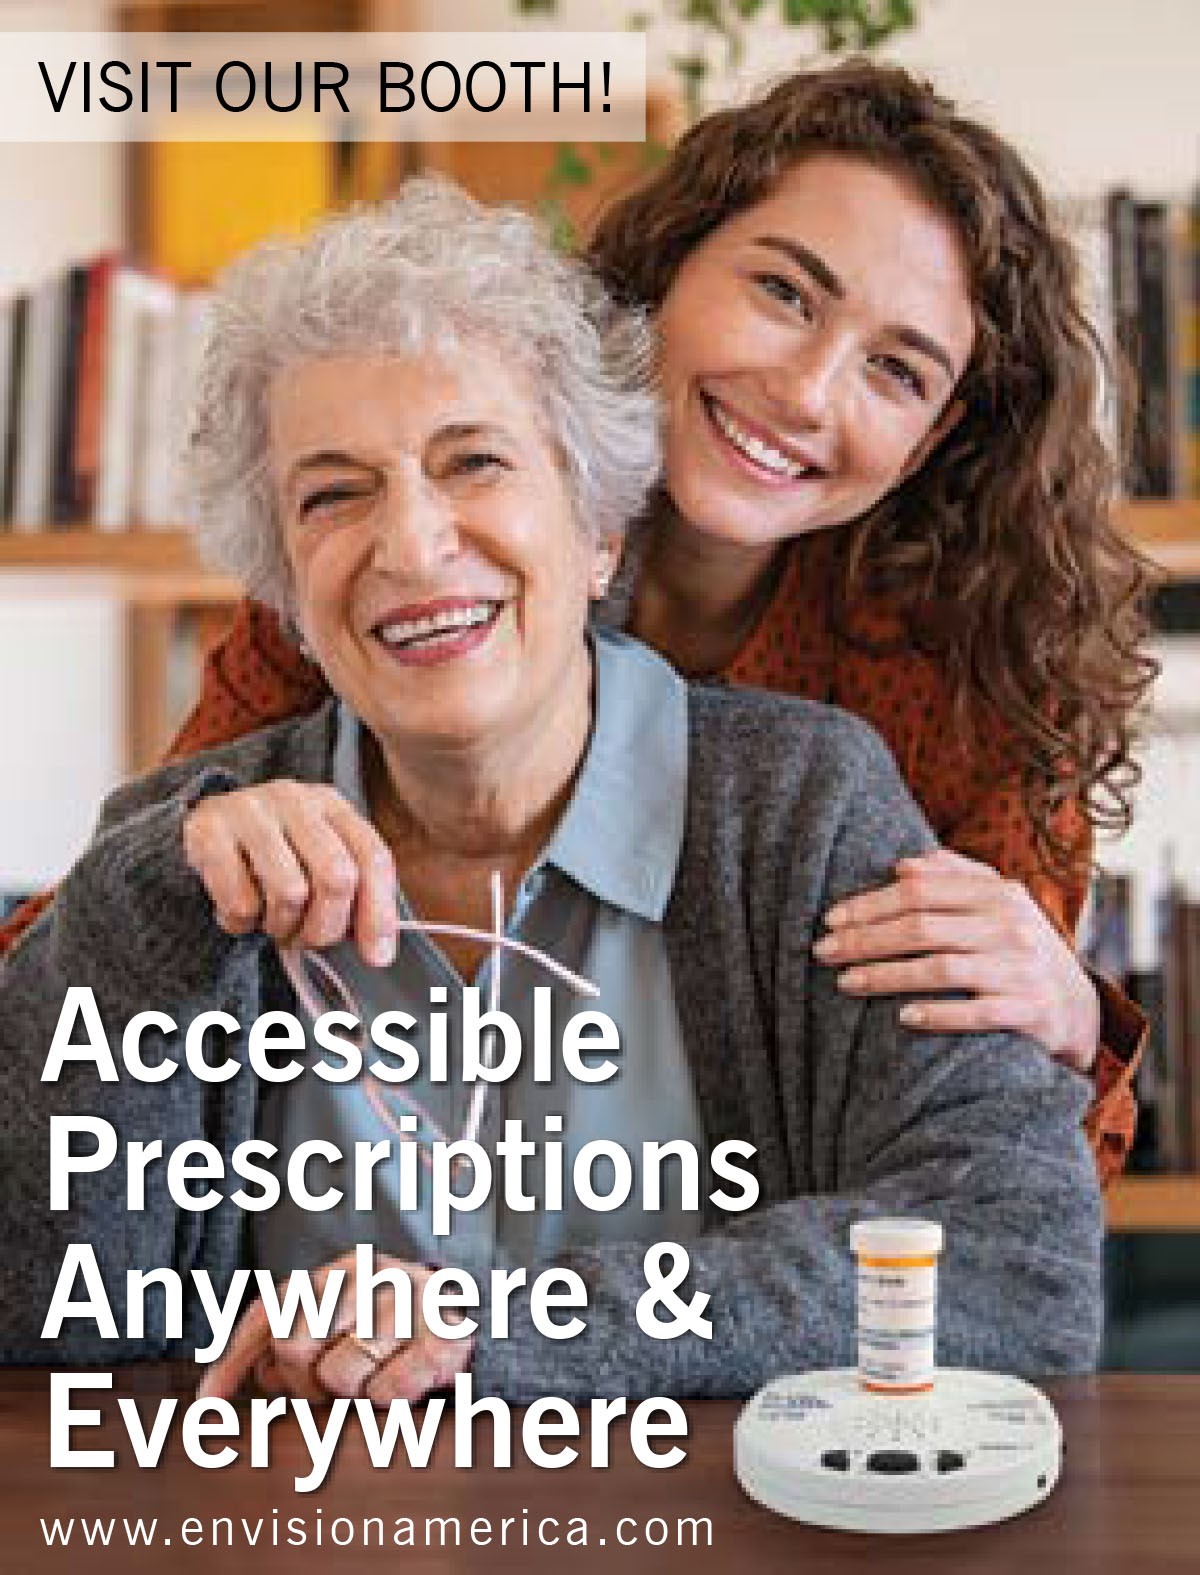 Visit our booth! Accessible prescriptions anywhere & everywhere. www.envisionamerica.com 